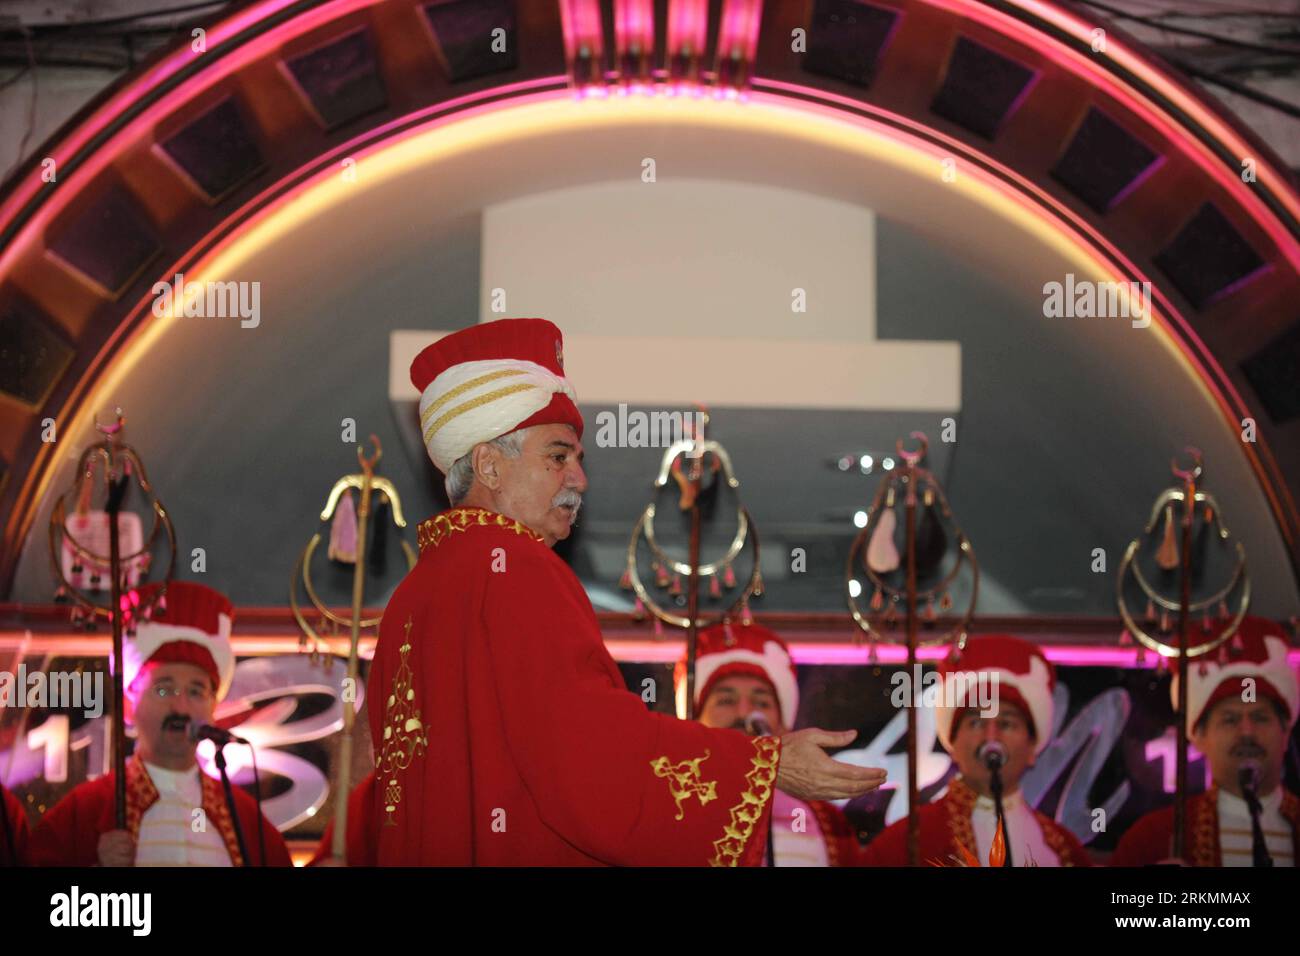 Bildnummer: 56786000  Datum: 25.12.2011  Copyright: imago/Xinhua (111225) -- ISTANBUL, Dec. 25, 2011 (Xinhua) -- The Ottoman Military band performs on the concert as the final event of the Grand Bazaar 550th Anniversary Celebrations in Istanbul, Turkey, on Dec. 25, 2011. Called simply the Kapali Carsi (Covered Market) in Turkish, the 550-year-old domed-capped bazaar is located at the heart of Istanbul. (Xinhua/Ma Yan) TURKEY-ISTANBUL-GRAND BAZAAR PUBLICATIONxNOTxINxCHN Gesellschaft Land Leute Tradition Kostüm Militärkapelle Kapelle x0x xst 2011 quer      56786000 Date 25 12 2011 Copyright Imag Stock Photo